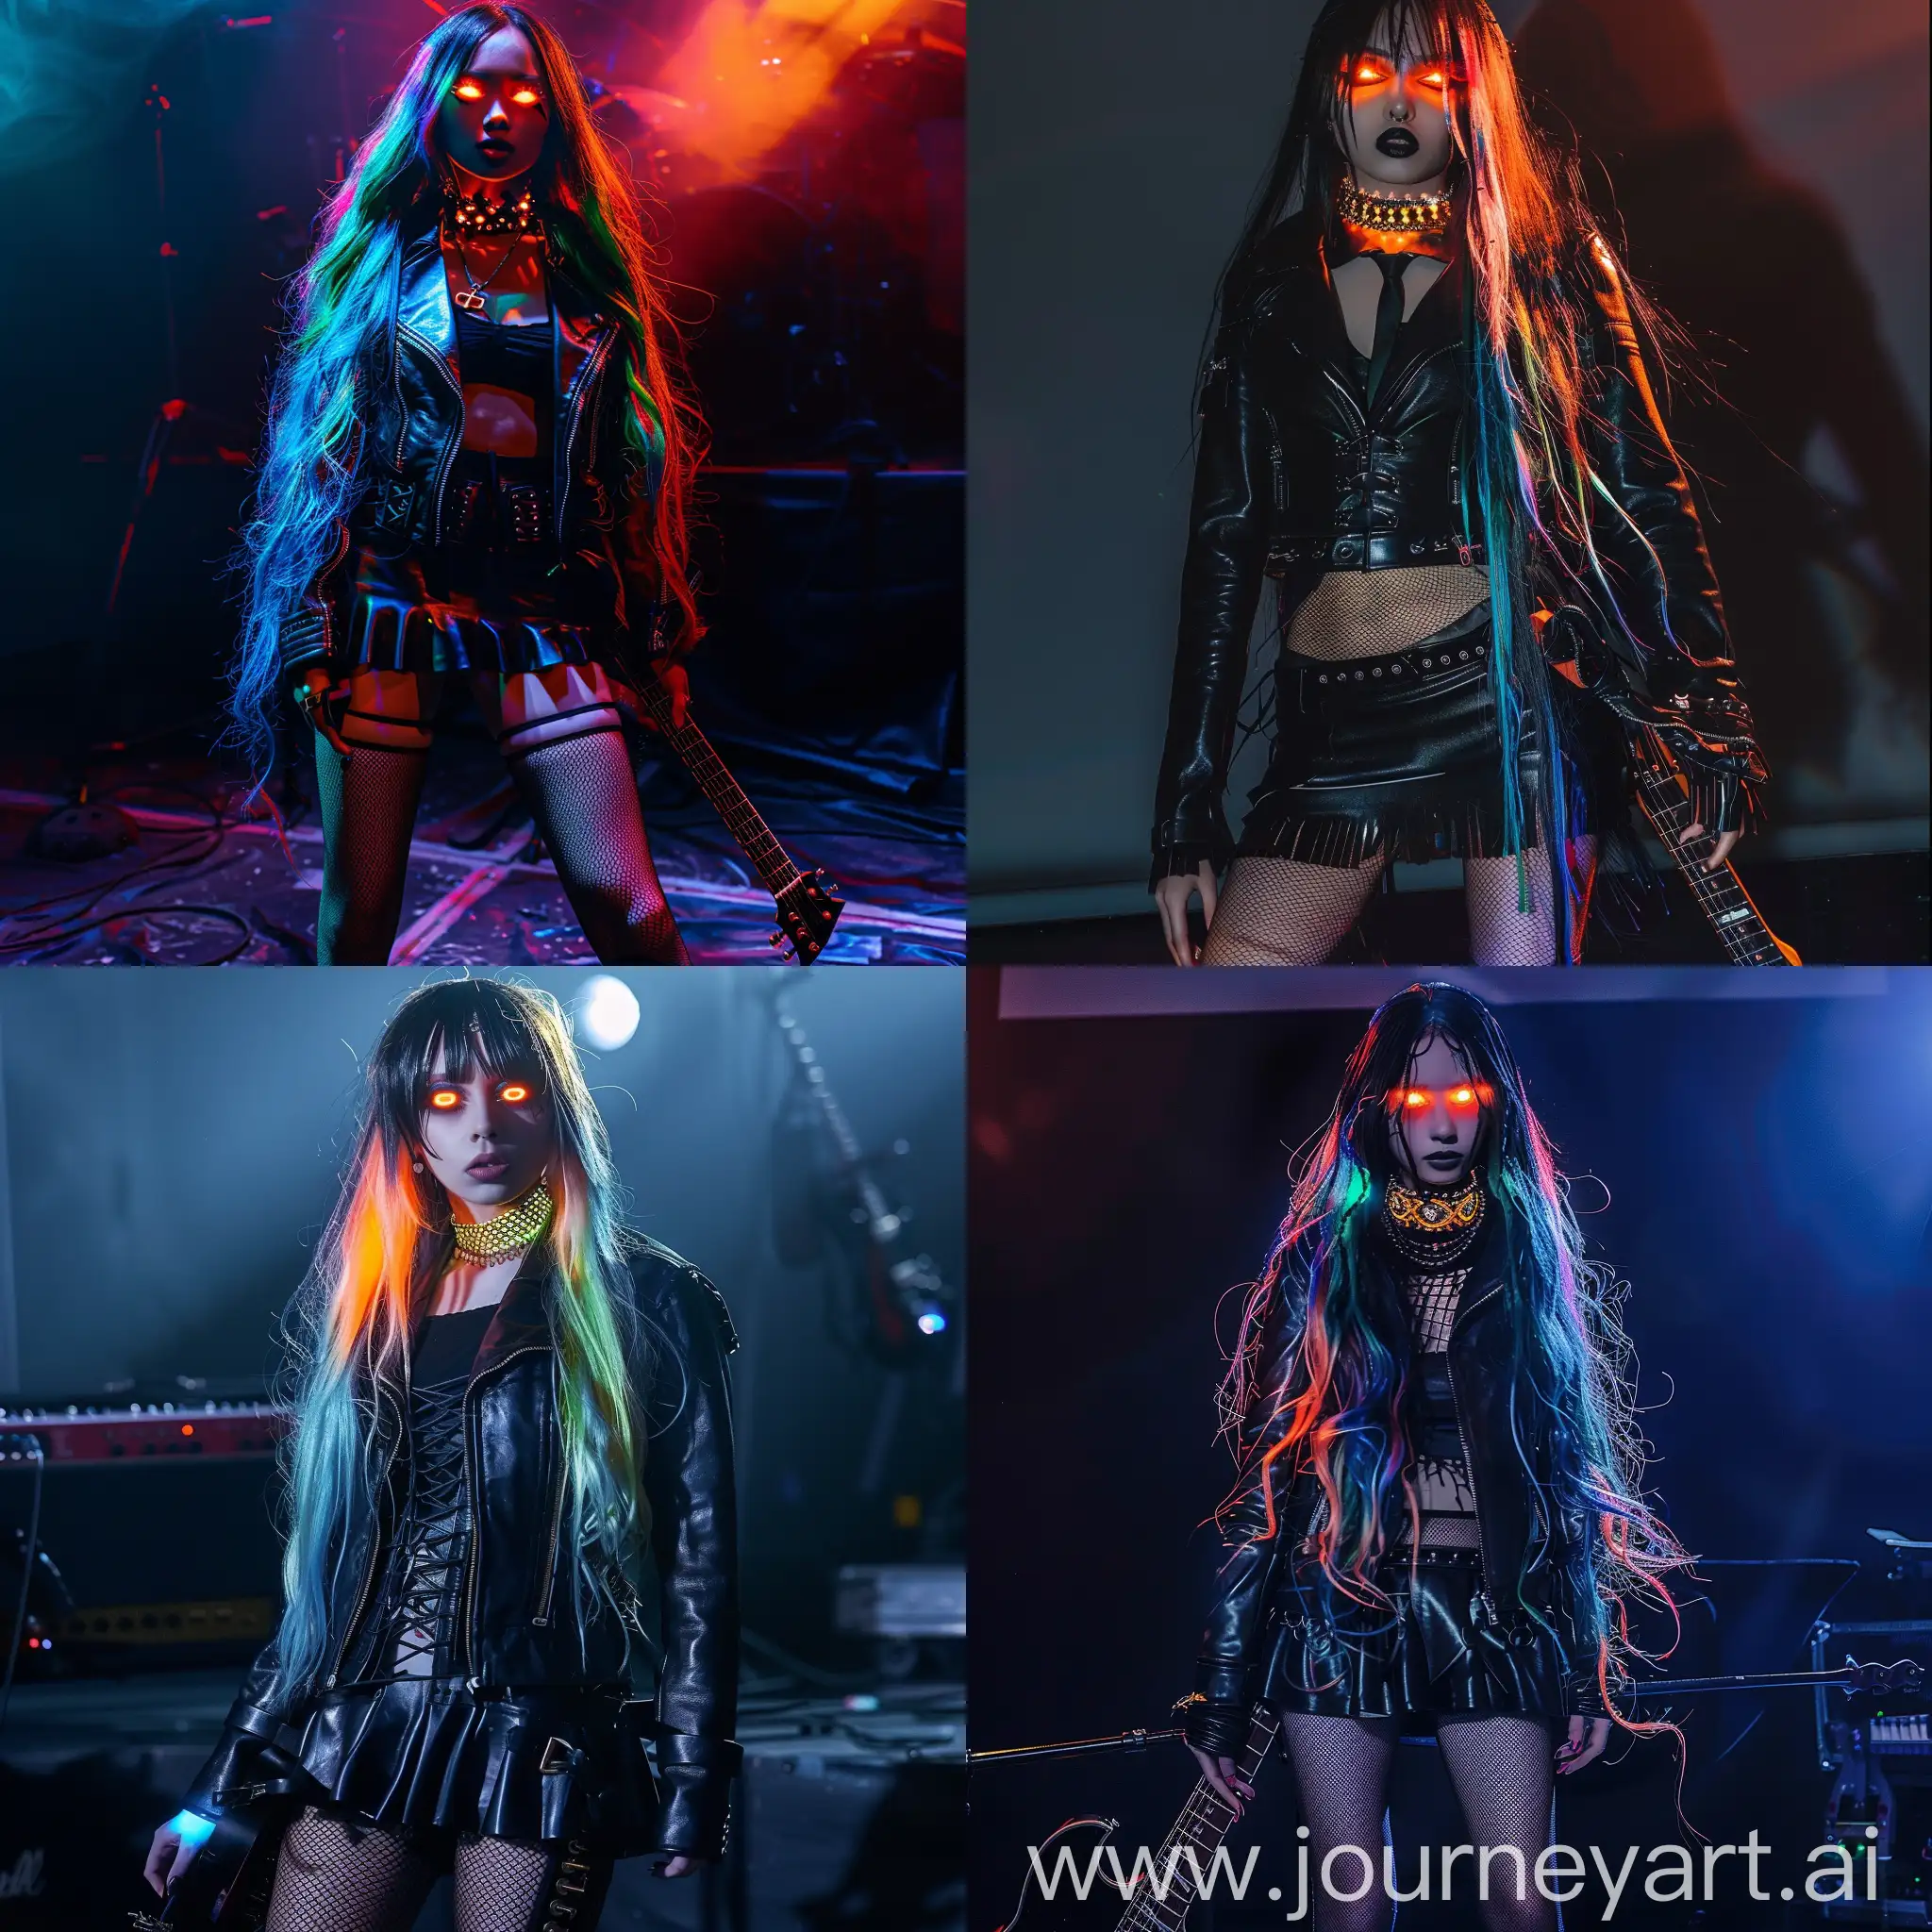 Solo-Rocker-Girl-with-Multicolor-Hair-and-Electric-Guitar-on-Dark-Stage